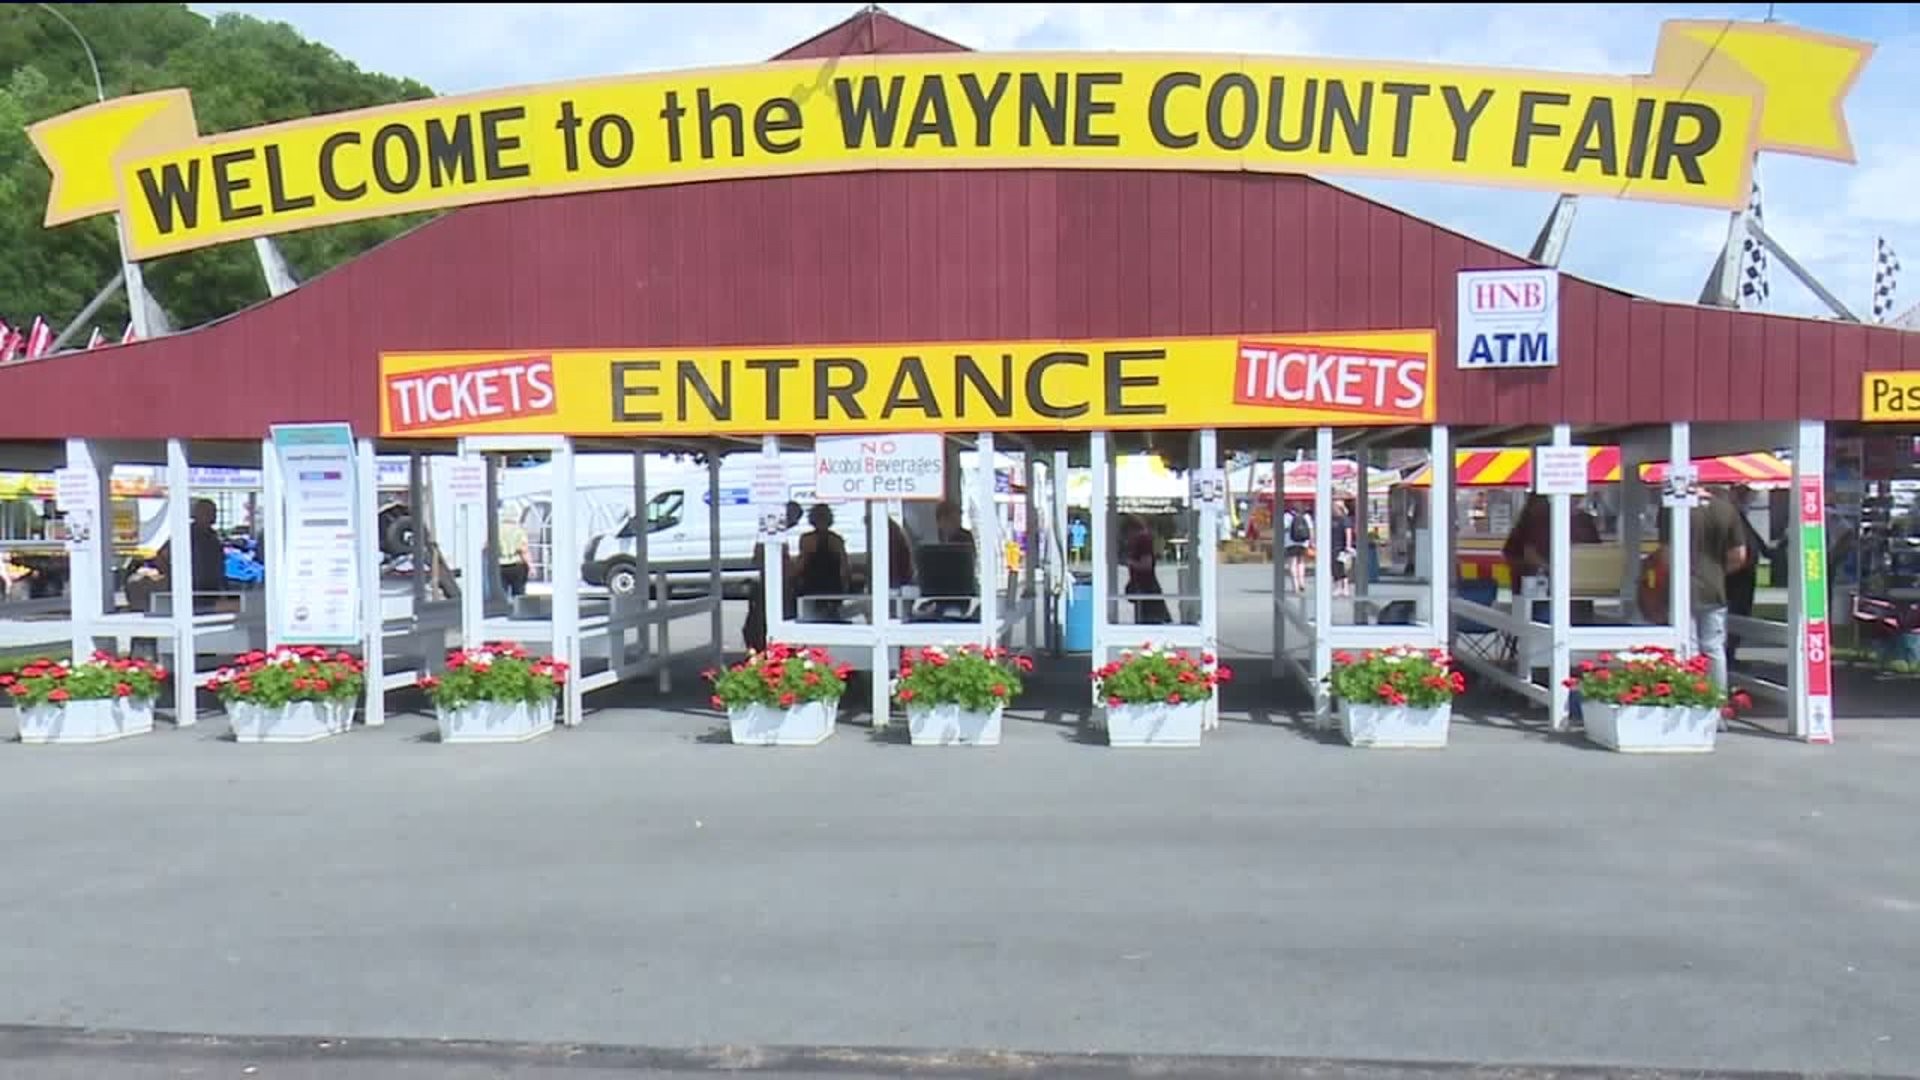 Finding Fun and Old Friends at Wayne County Fair